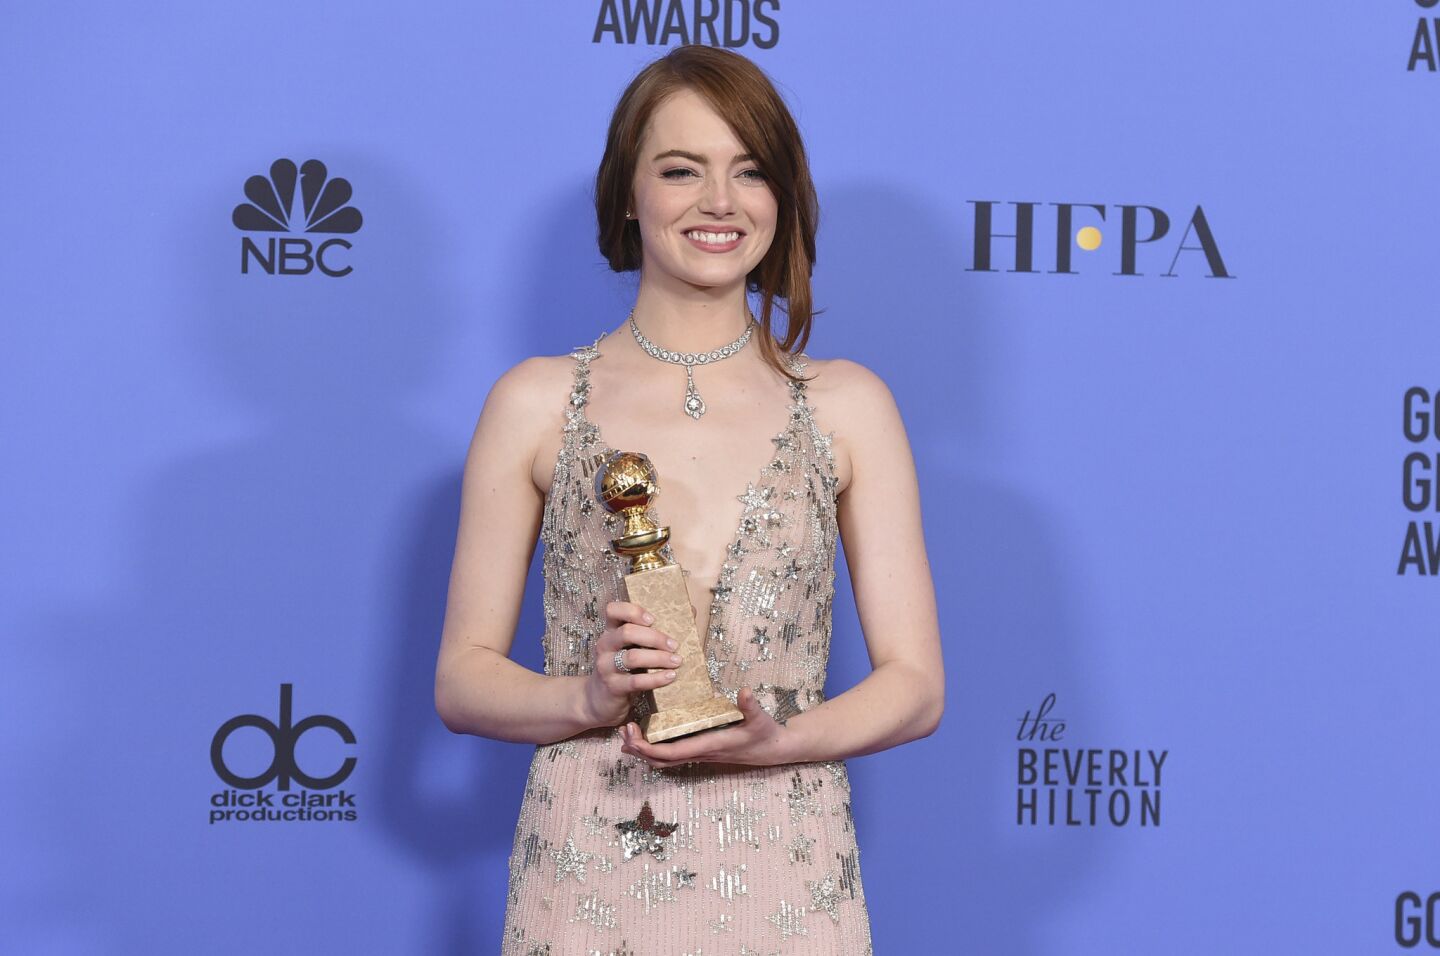 Emma Stone with her award for actress in a motion picture musical or comedy for "La La Land."